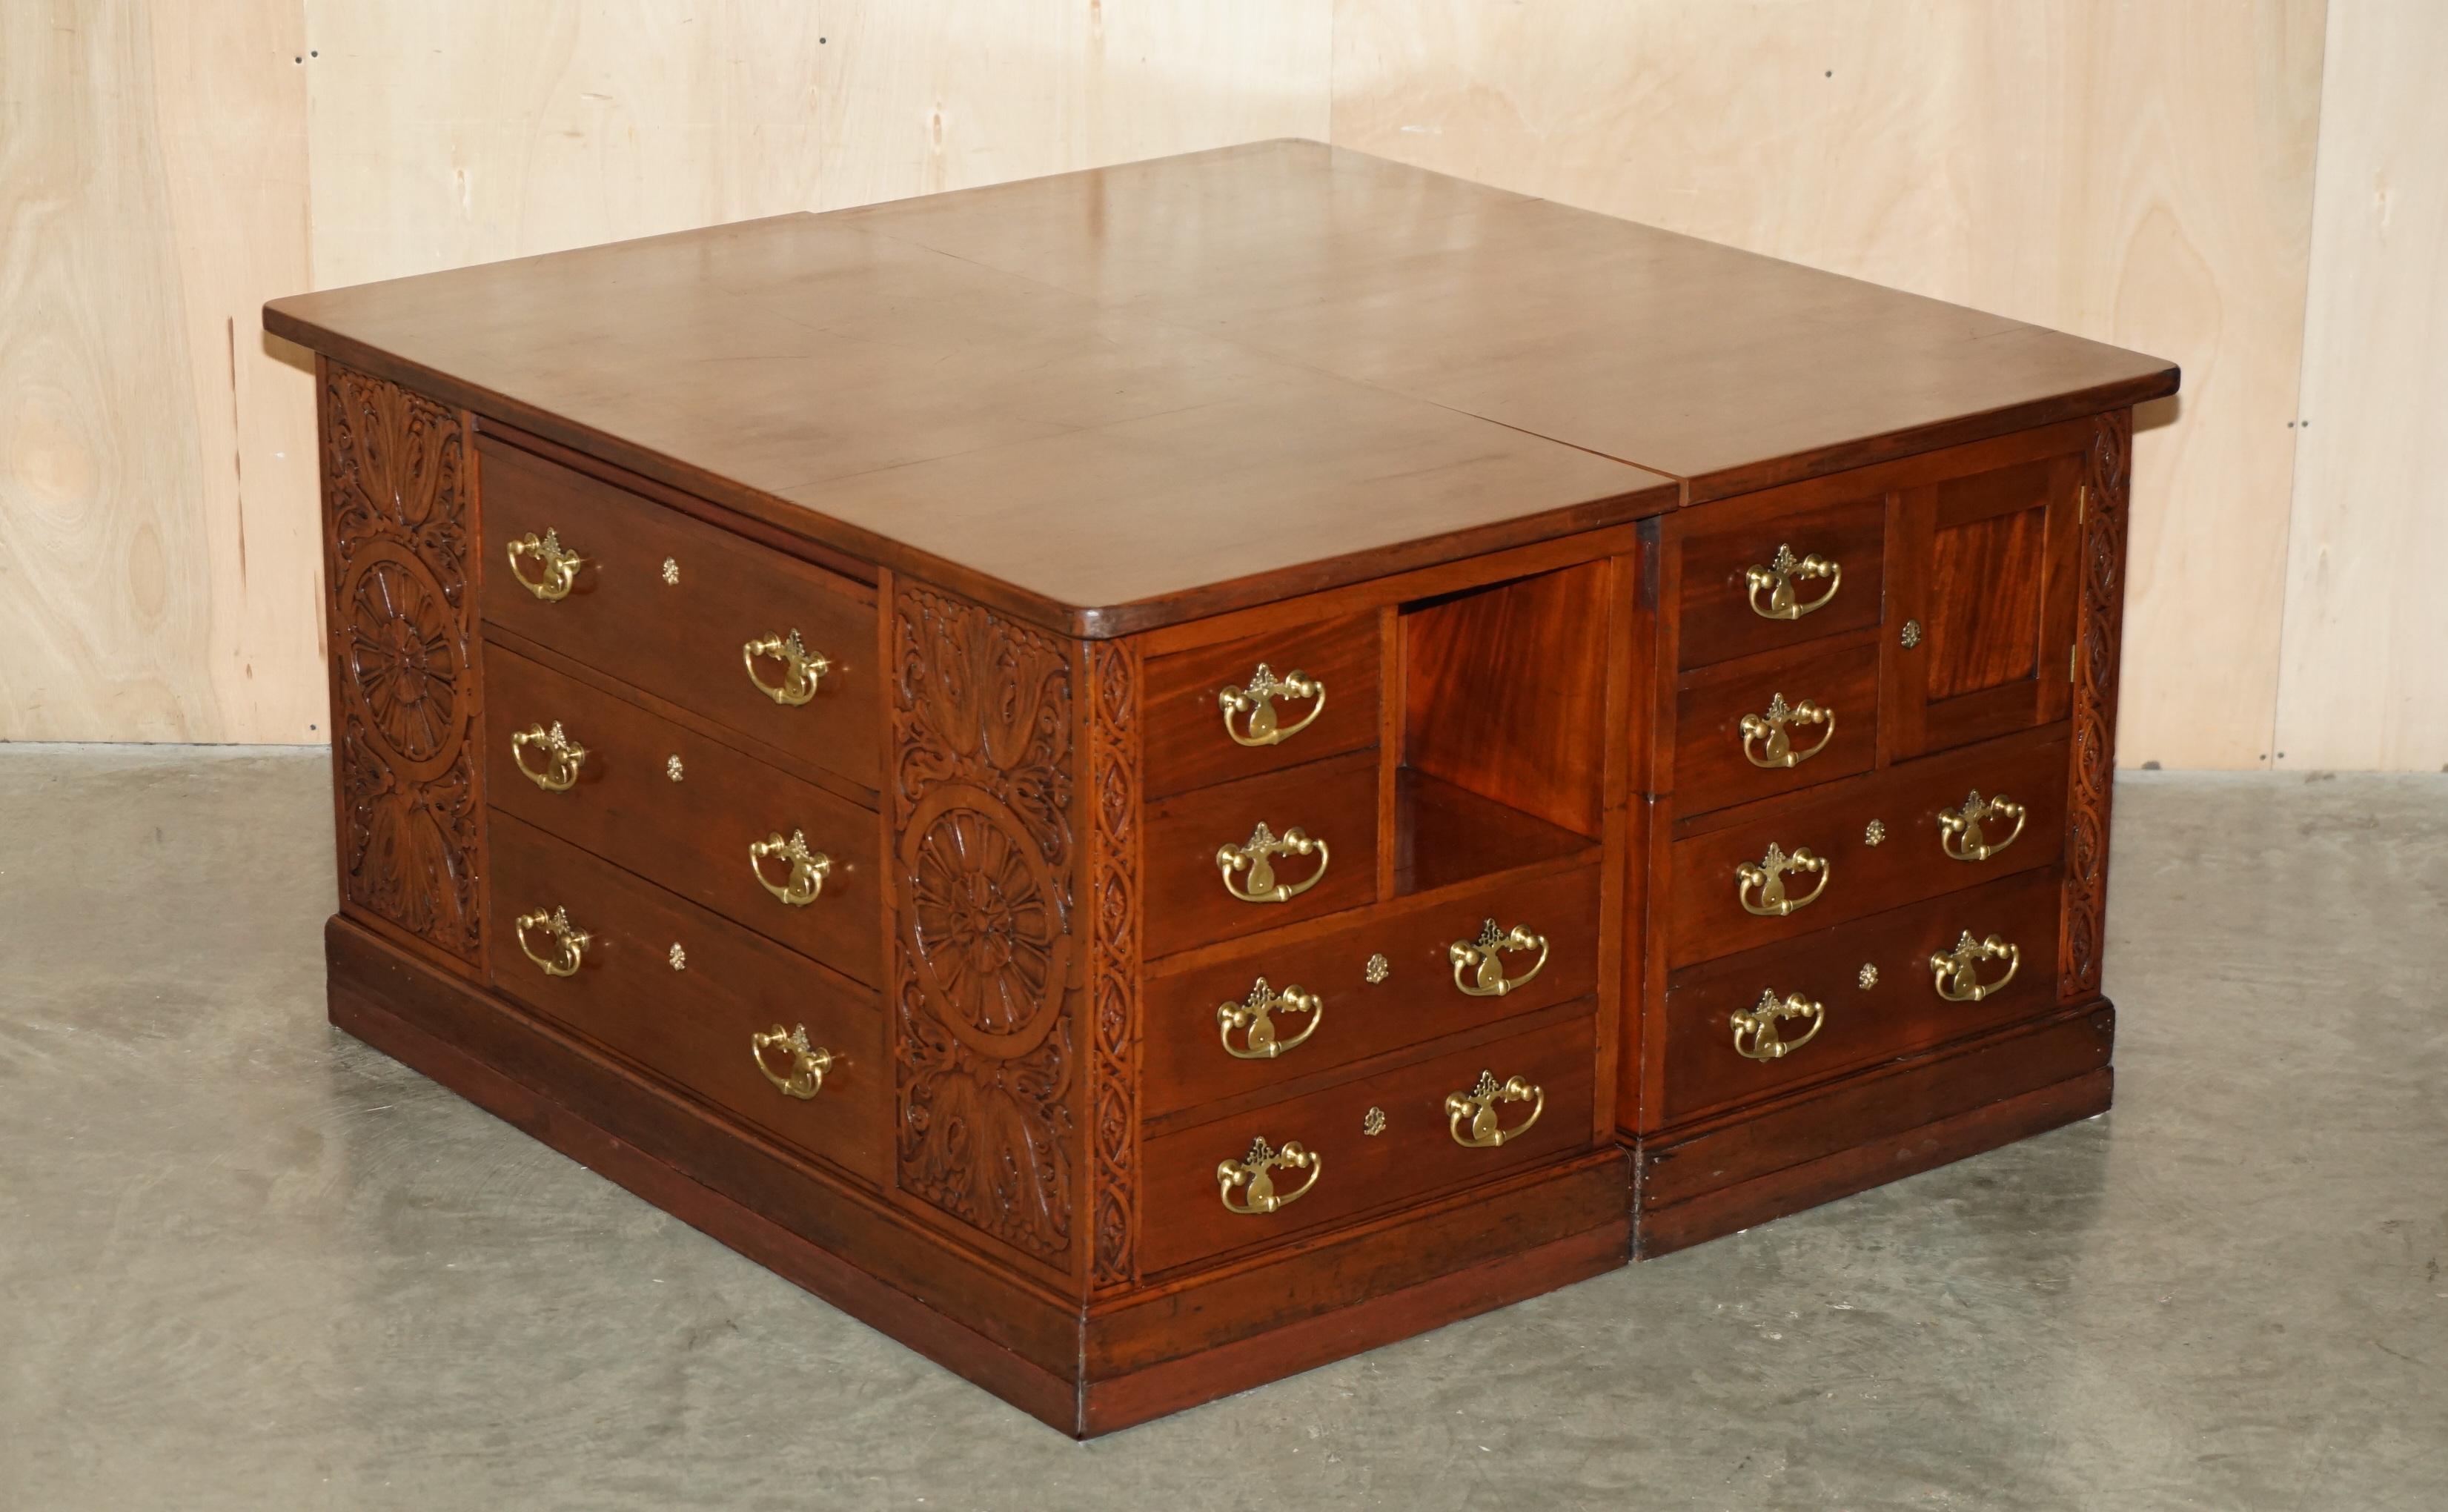 Royal House Antiques

Royal House Antiques is delighted to offer for sale this stunning, absolutely massive Estate made desk, Island or pair of Sideboards hand carved in the Thomas Chippendale manor 

Please note the delivery fee listed is just a